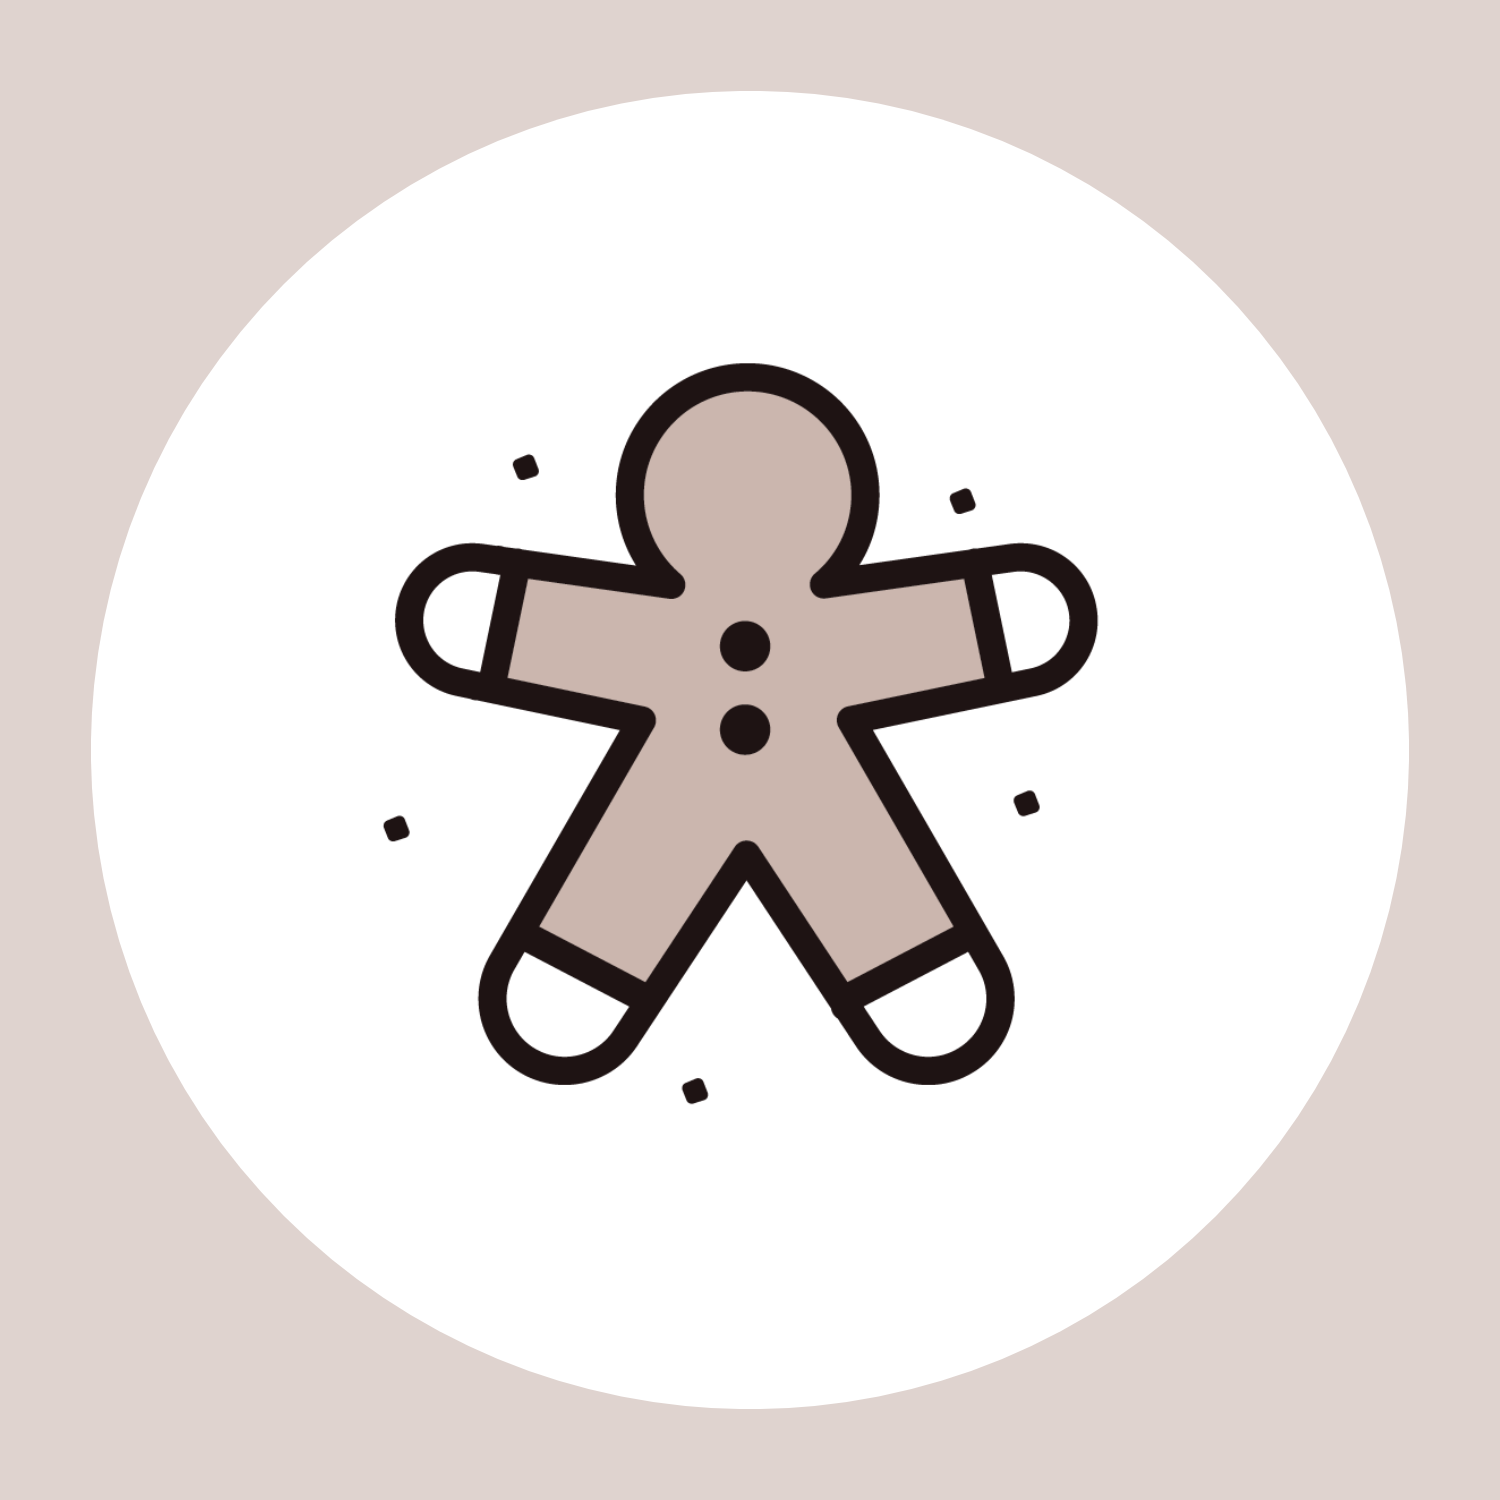 drawing of a gingerbread man